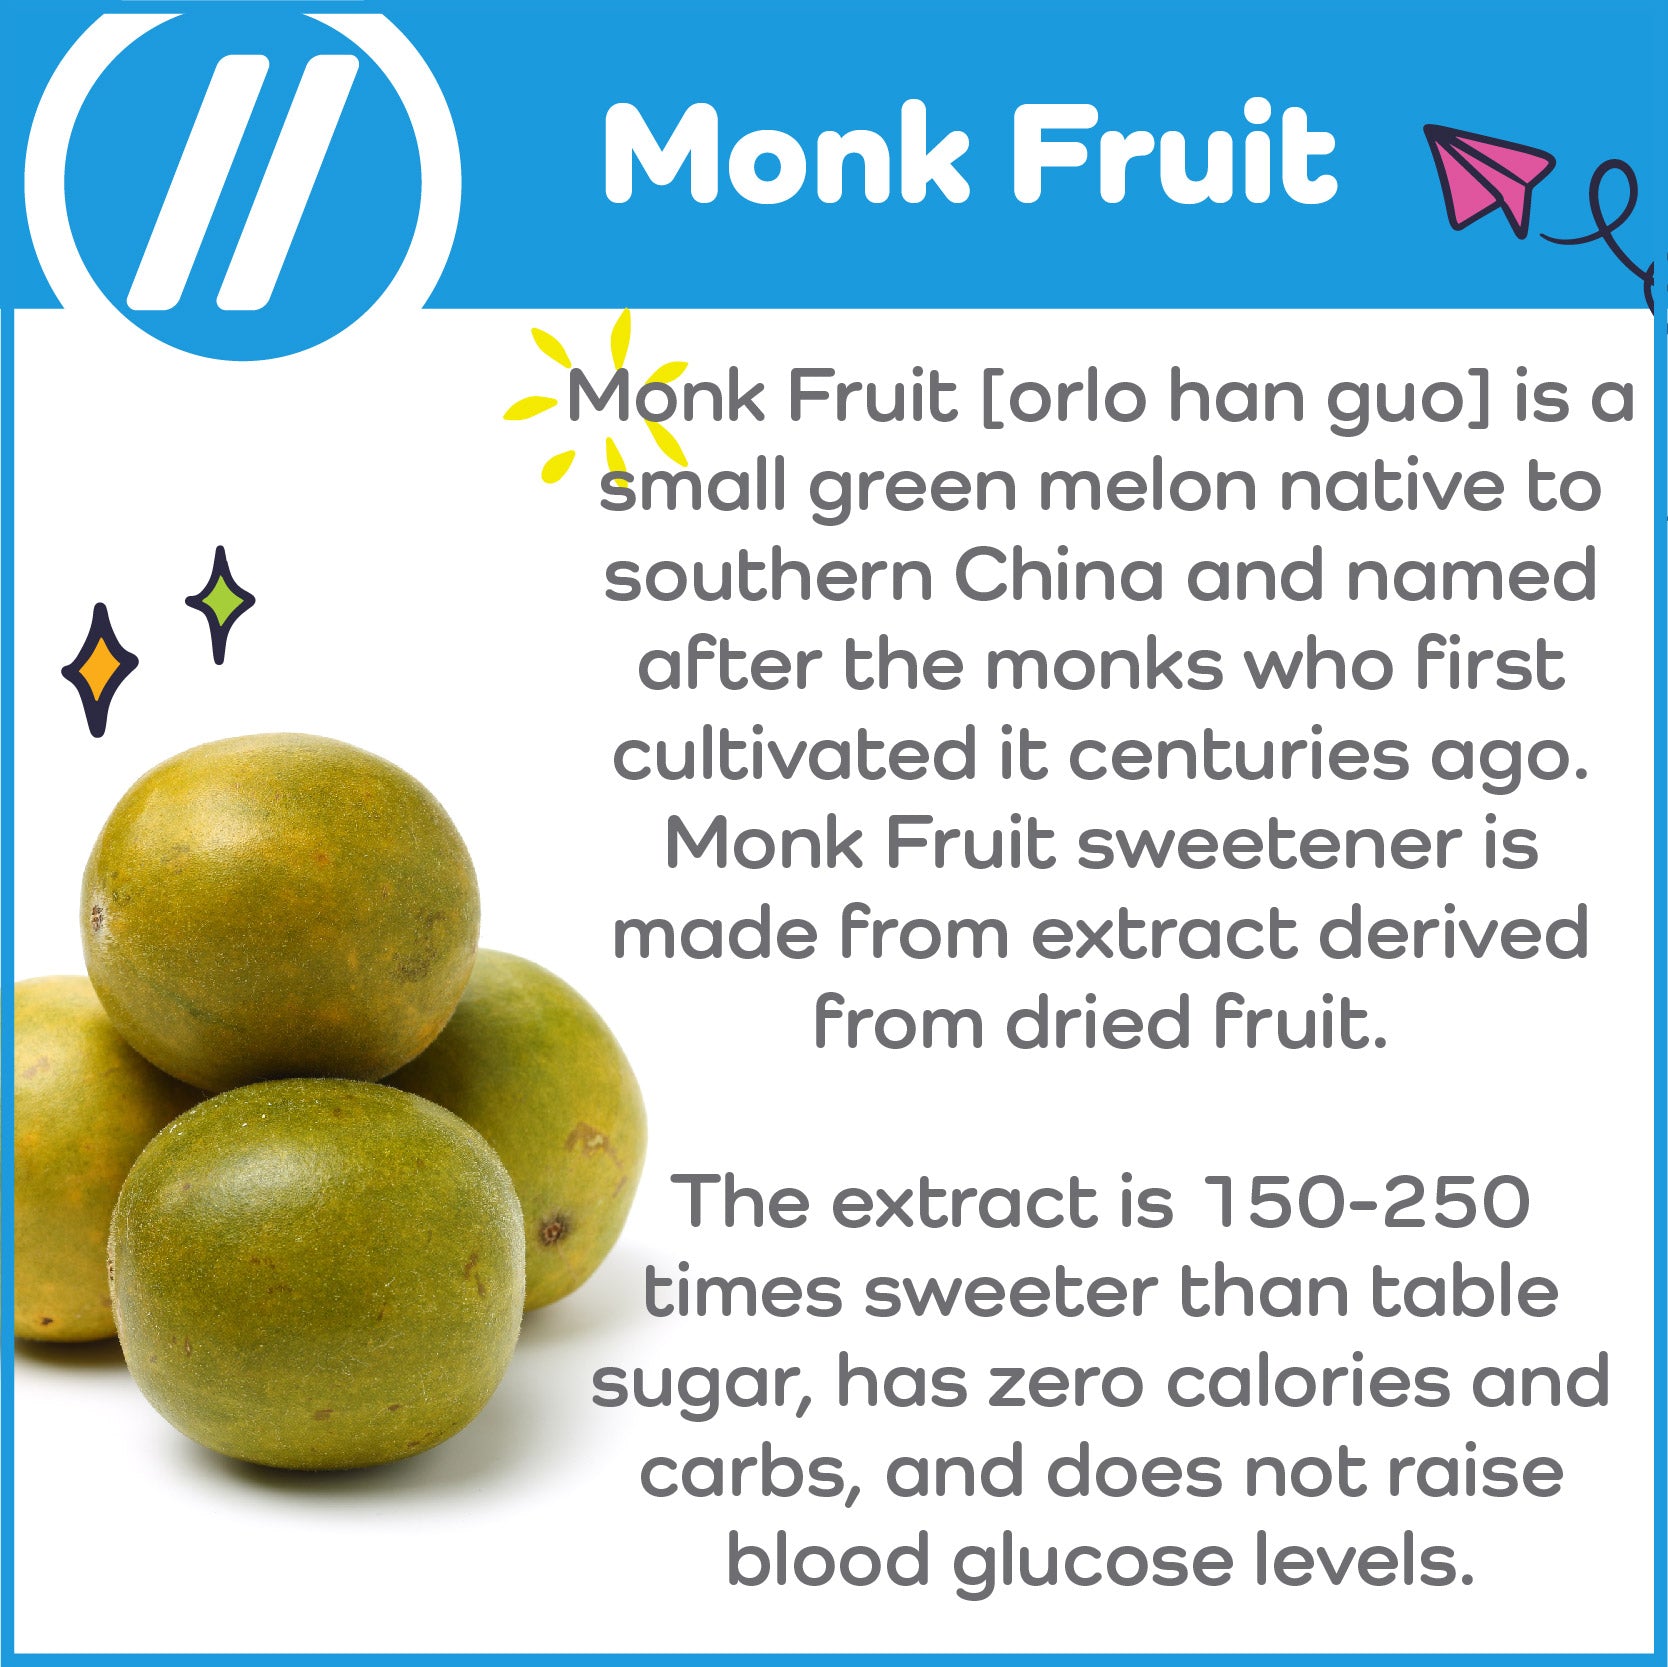 What is Monk Fruit